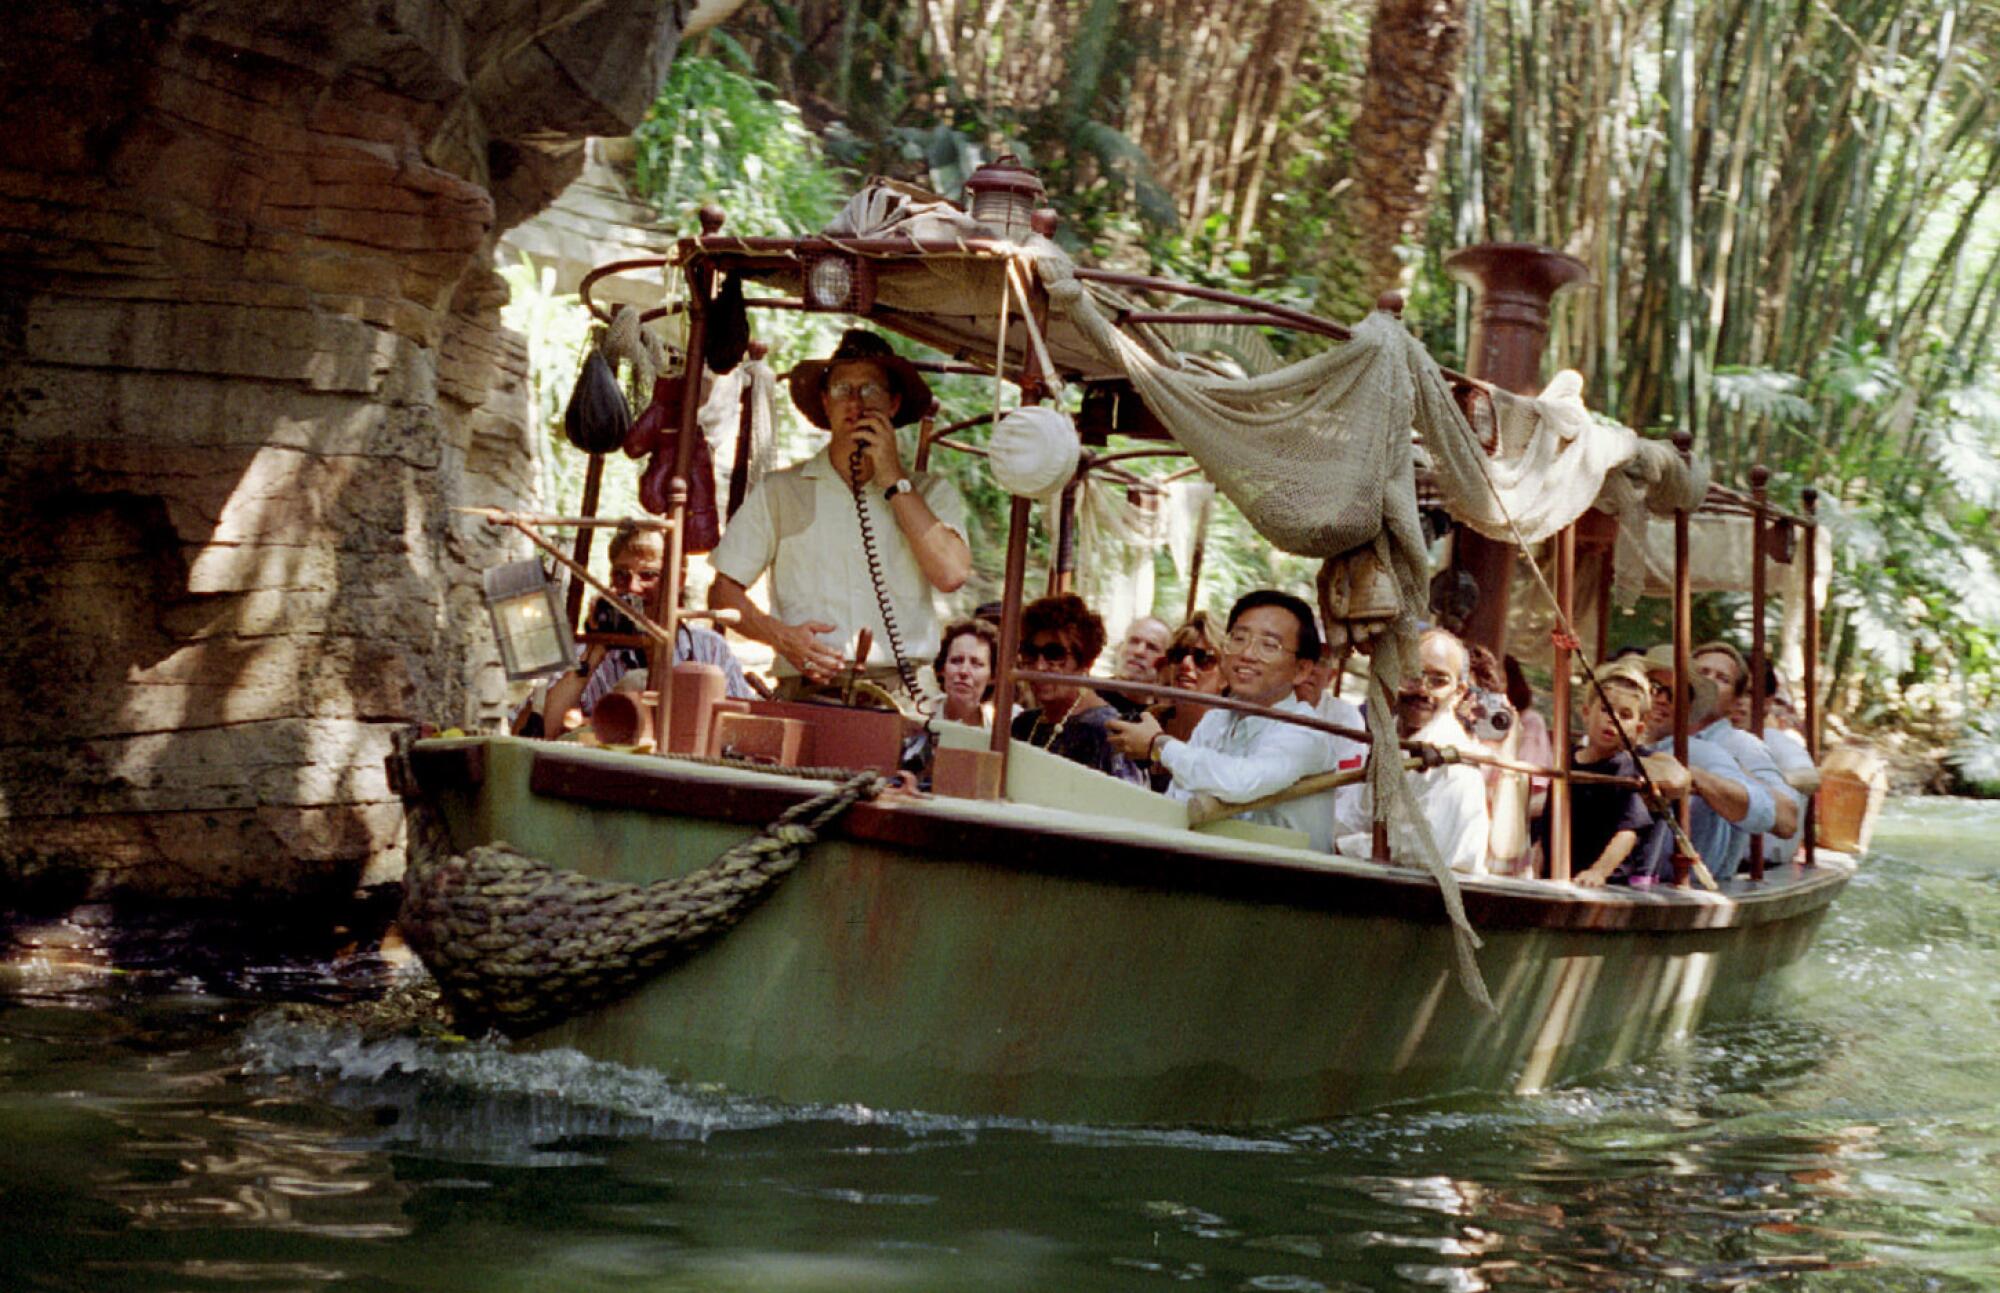 A Jungle Cruise boat filled with passengers at Disneyland.